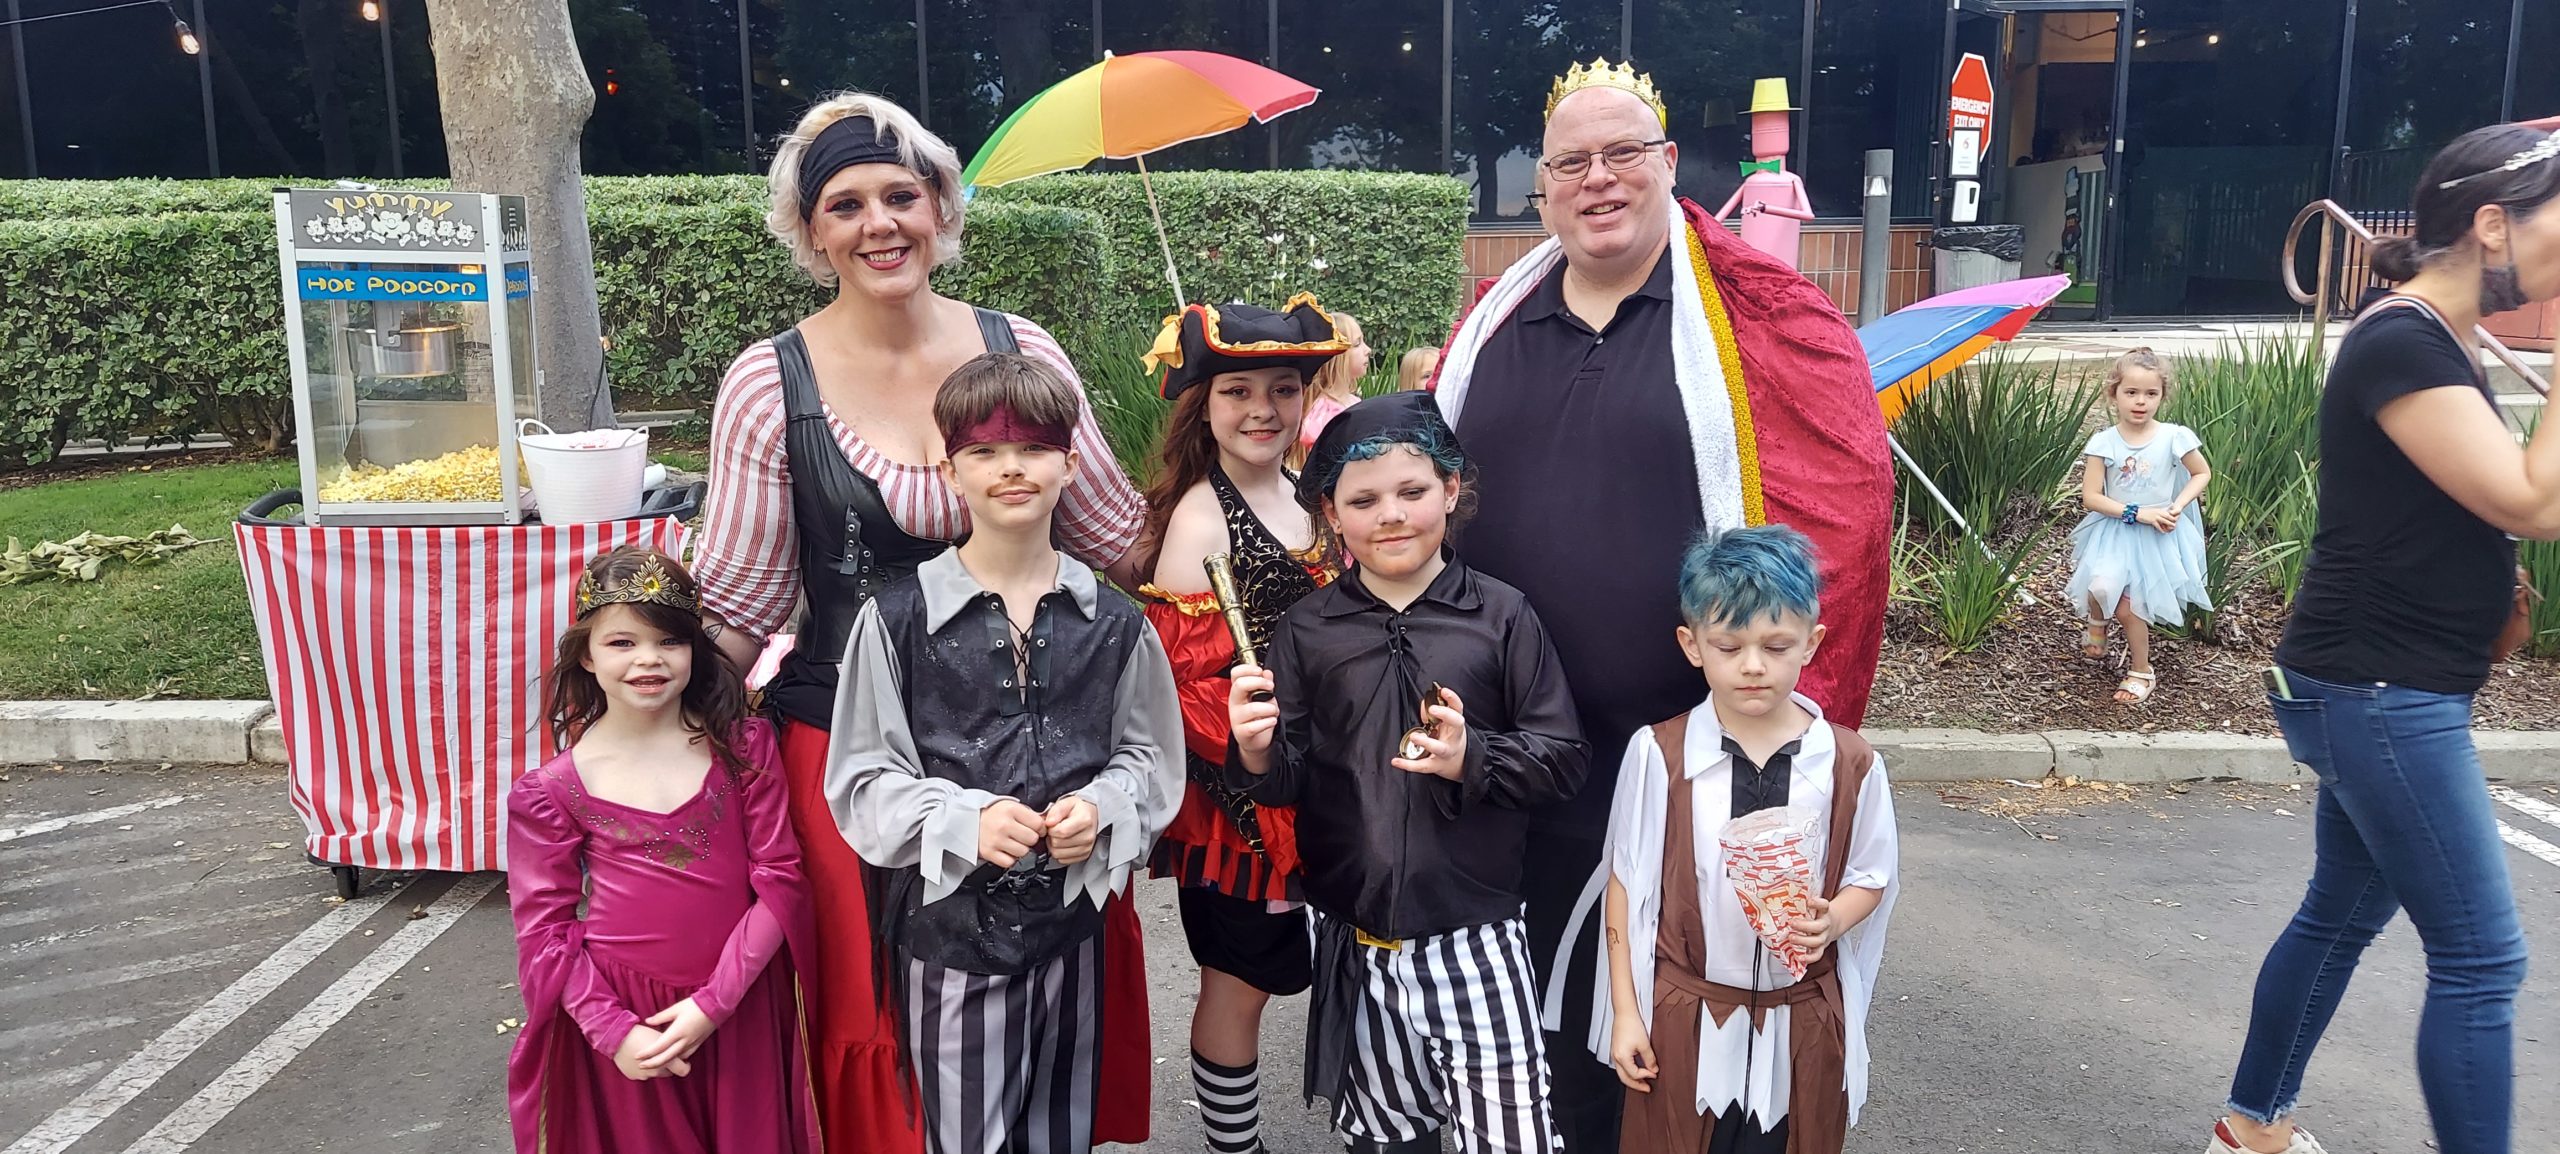 A family of 7 dressed as pirates and princesses pose outside in front of a popcorn cart